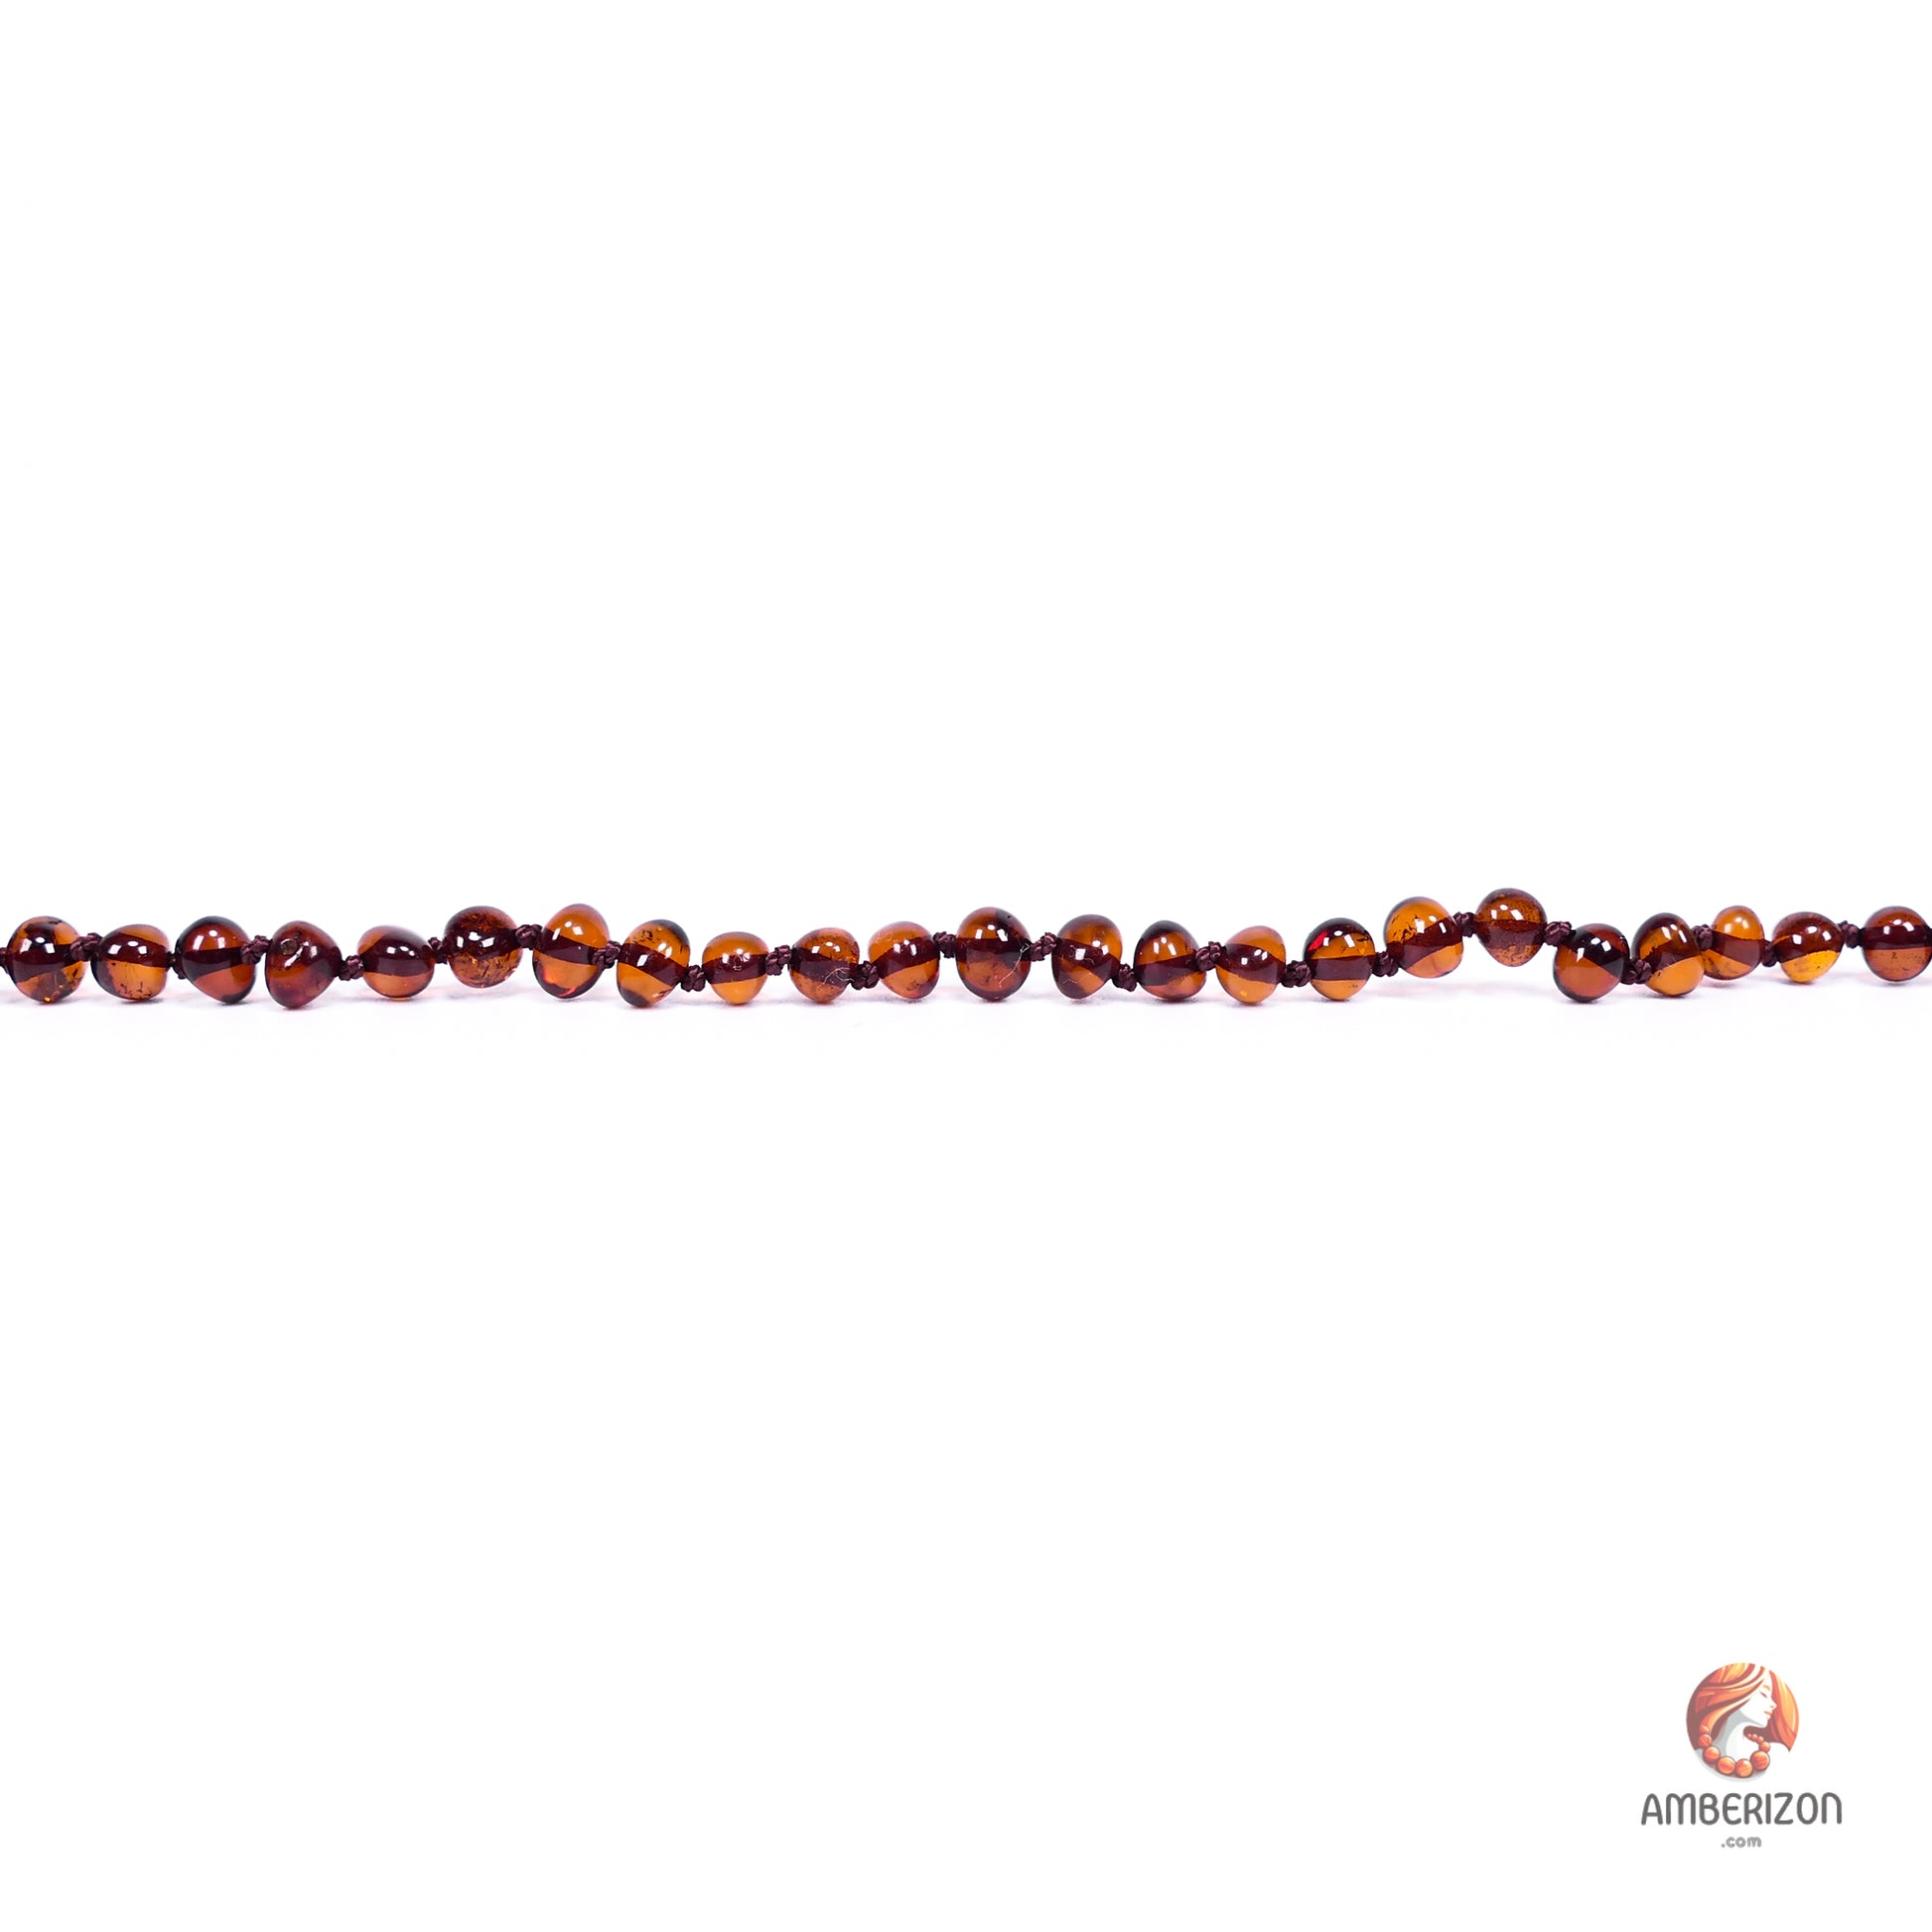 Minimalist women's necklace - Cherry Baroque polished amber beads